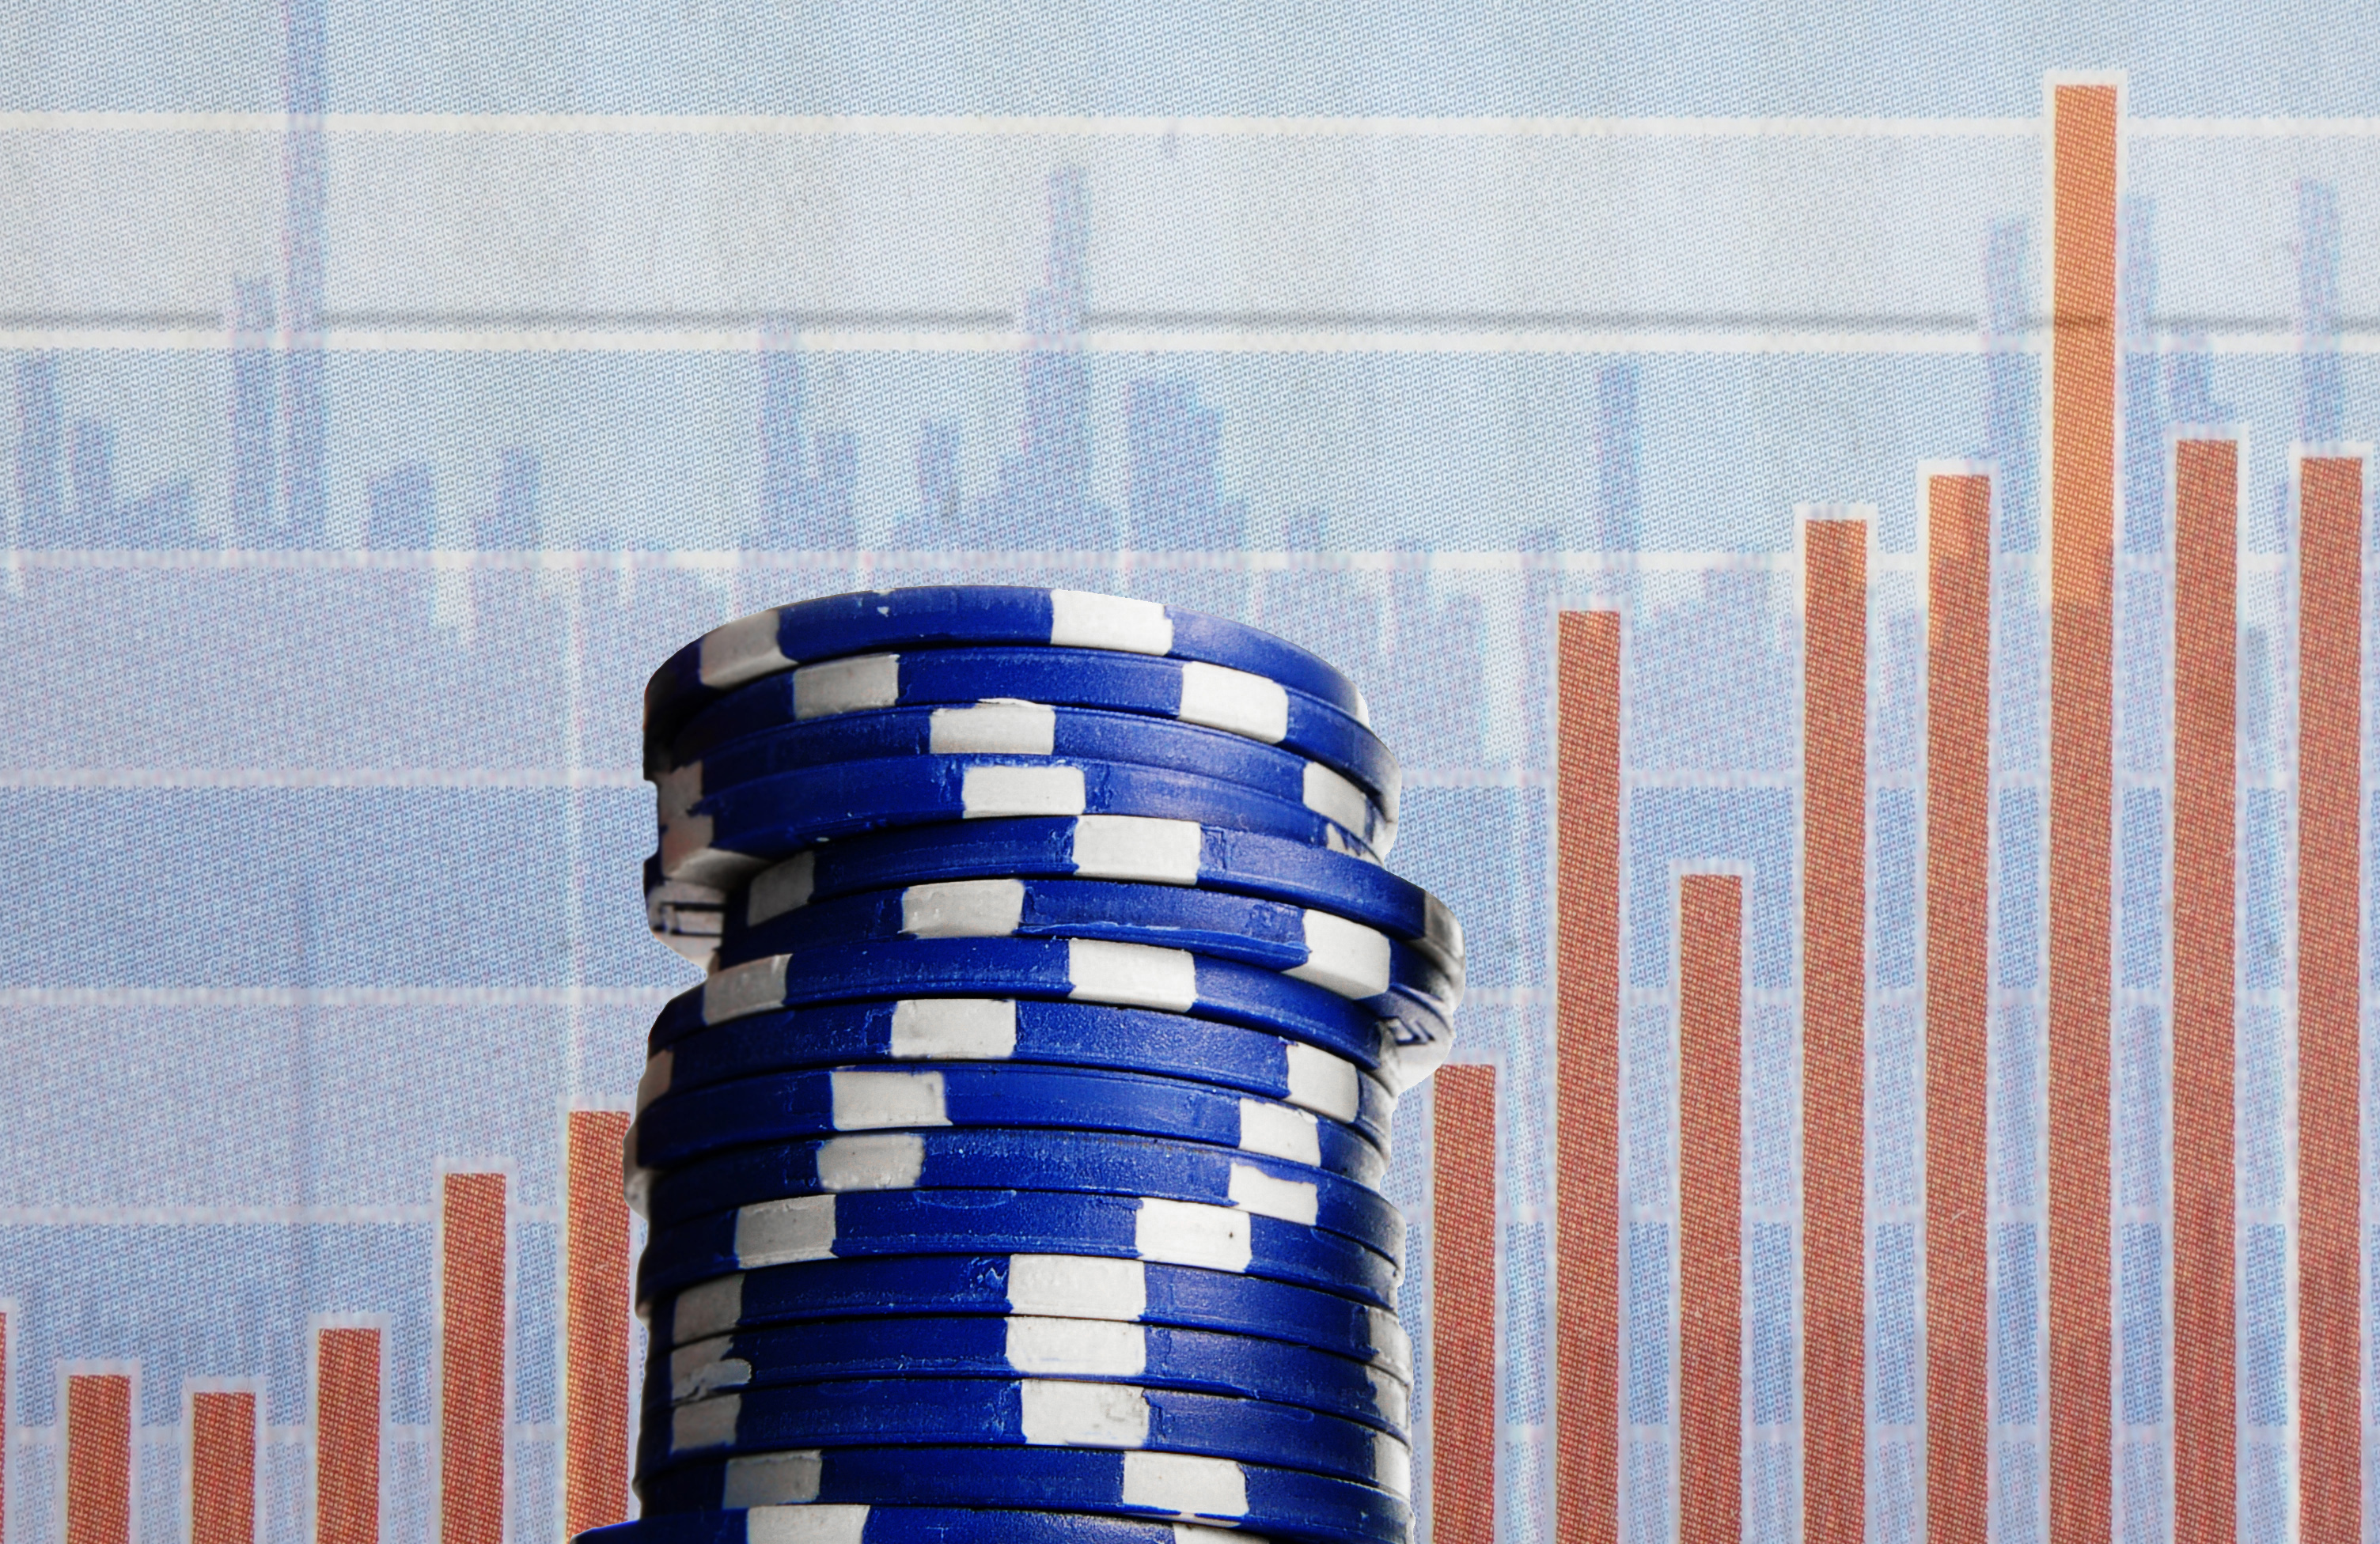 Blue poker chips in front of a stock chart.